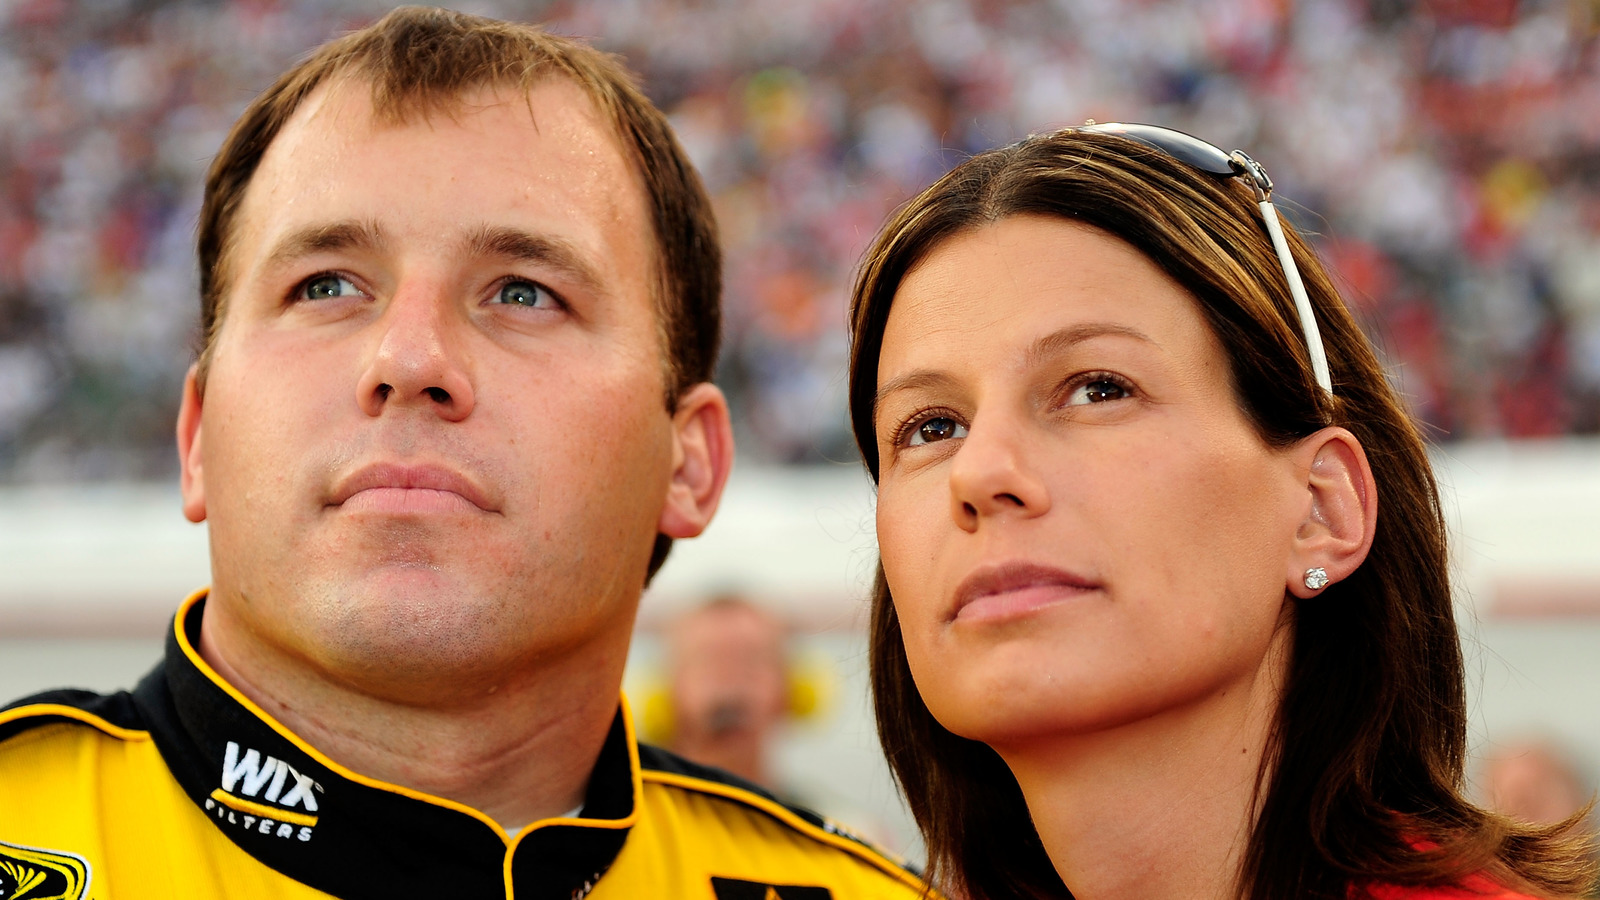 Ryan Newman Set to Return to NASCAR in 2022 What Fans Can Expect The